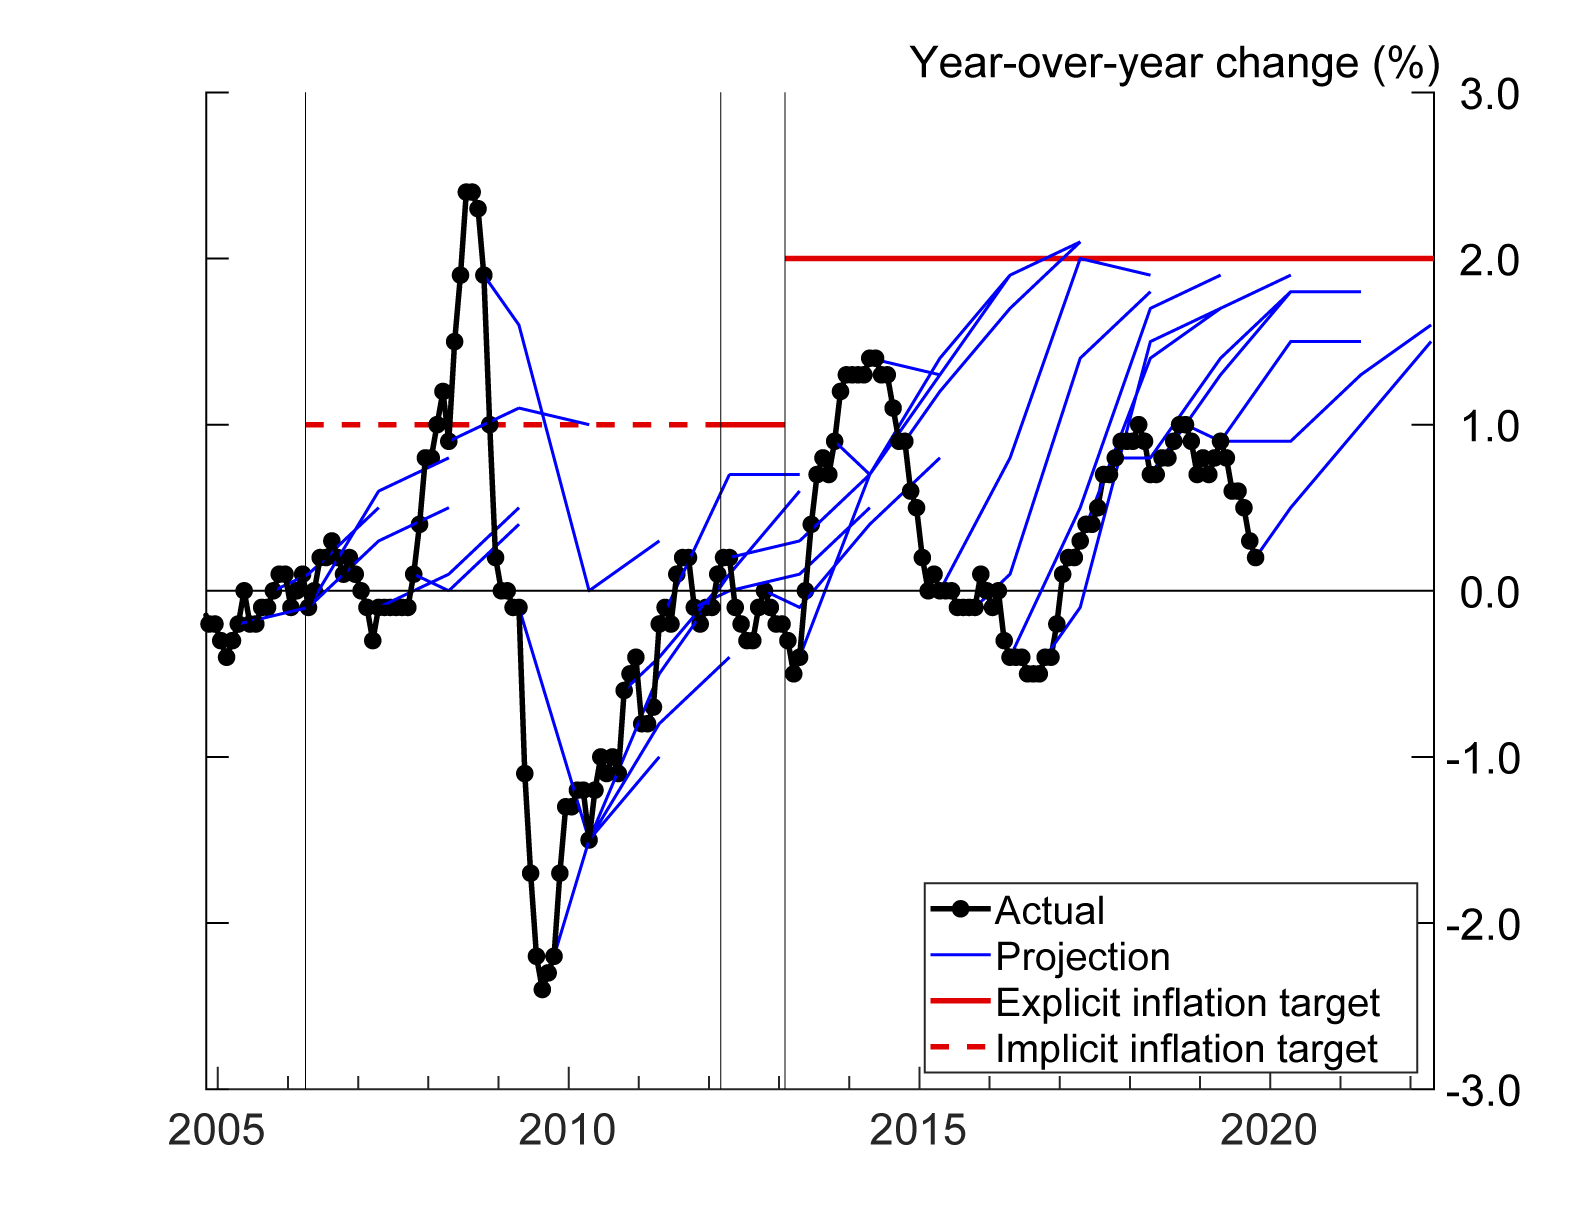 Figure 3. Bank of Japan's inflation projection. See accessible link for data description.